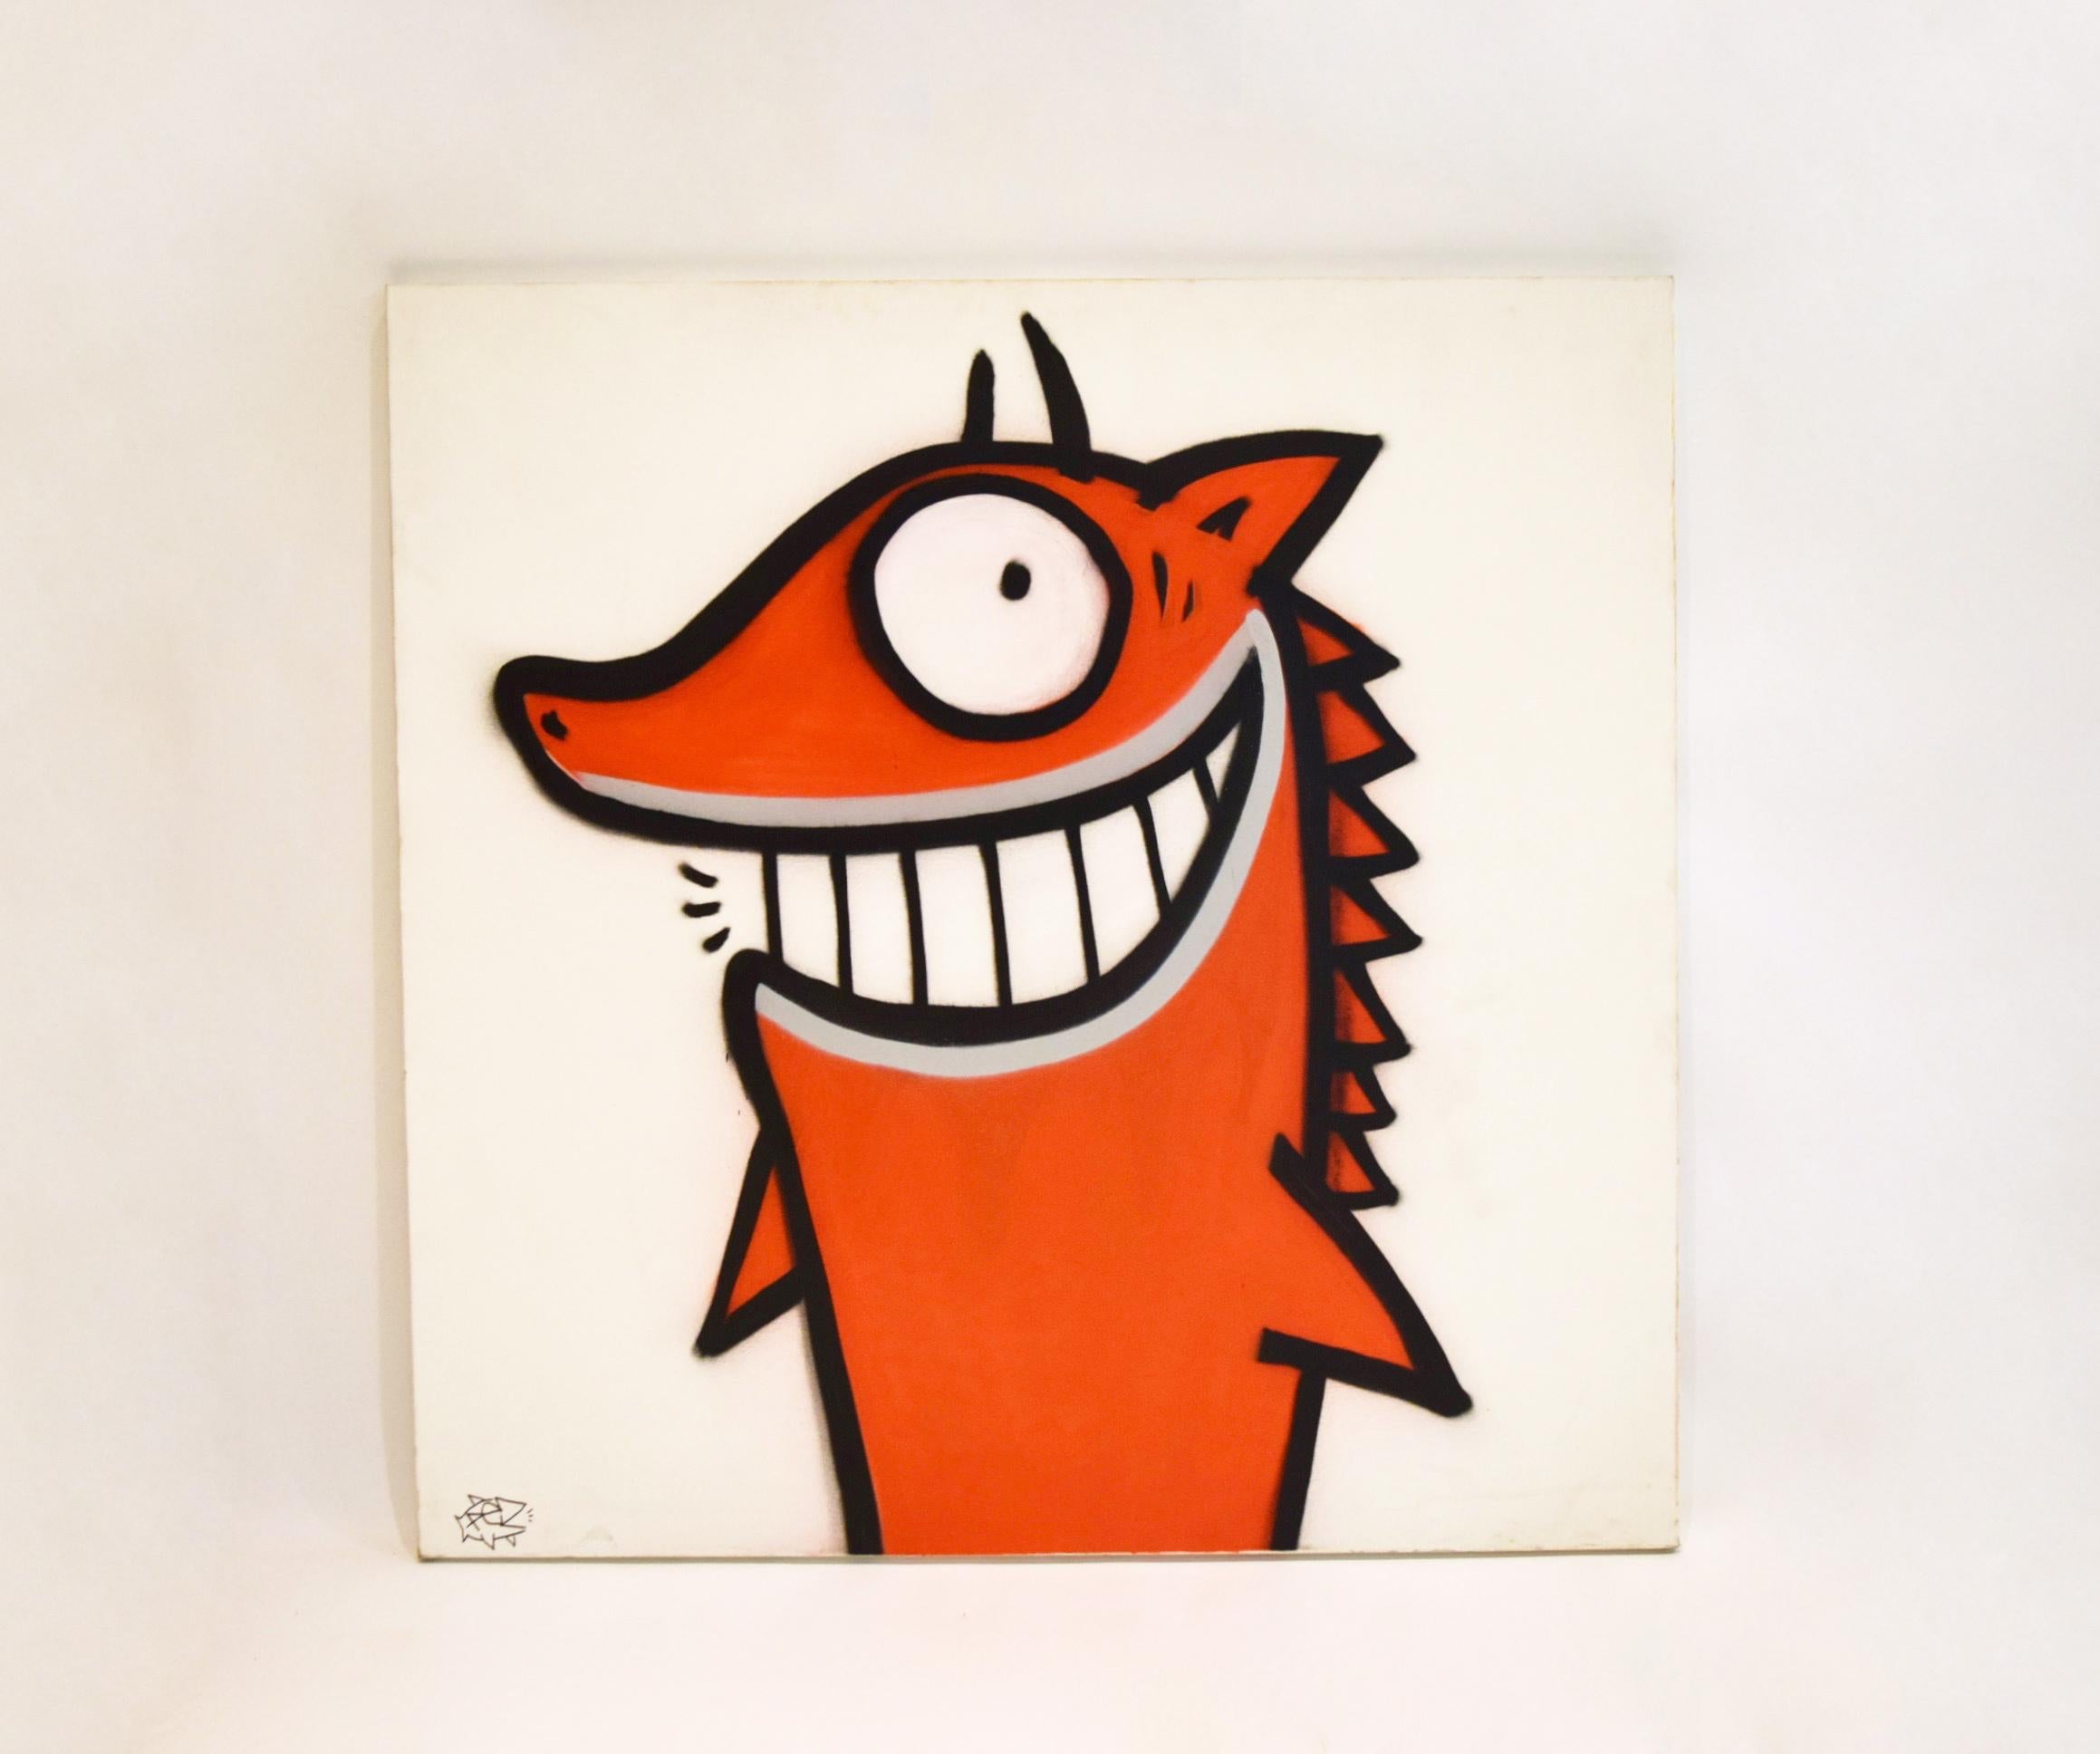 Commissioned painting on canvas by Spanish graffiti artist PEZ depicting a single red fish in his signature 'happy style' and signed on the back.